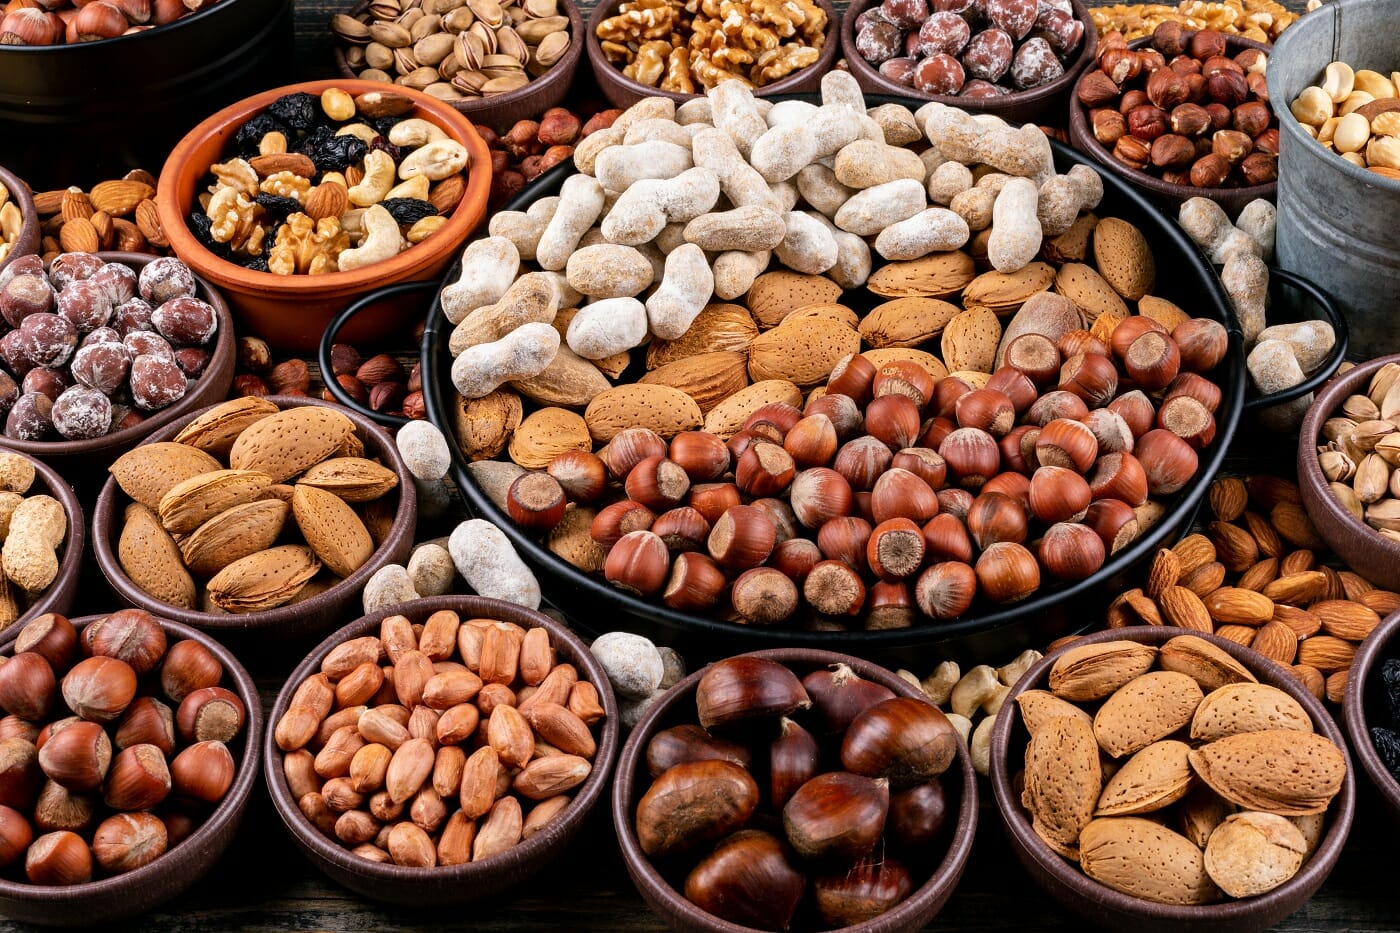 set-pecan-pistachios-almond-peanut-cashew-pine-nuts-assorted-nuts-dried-fruits-different-bowls-side-view